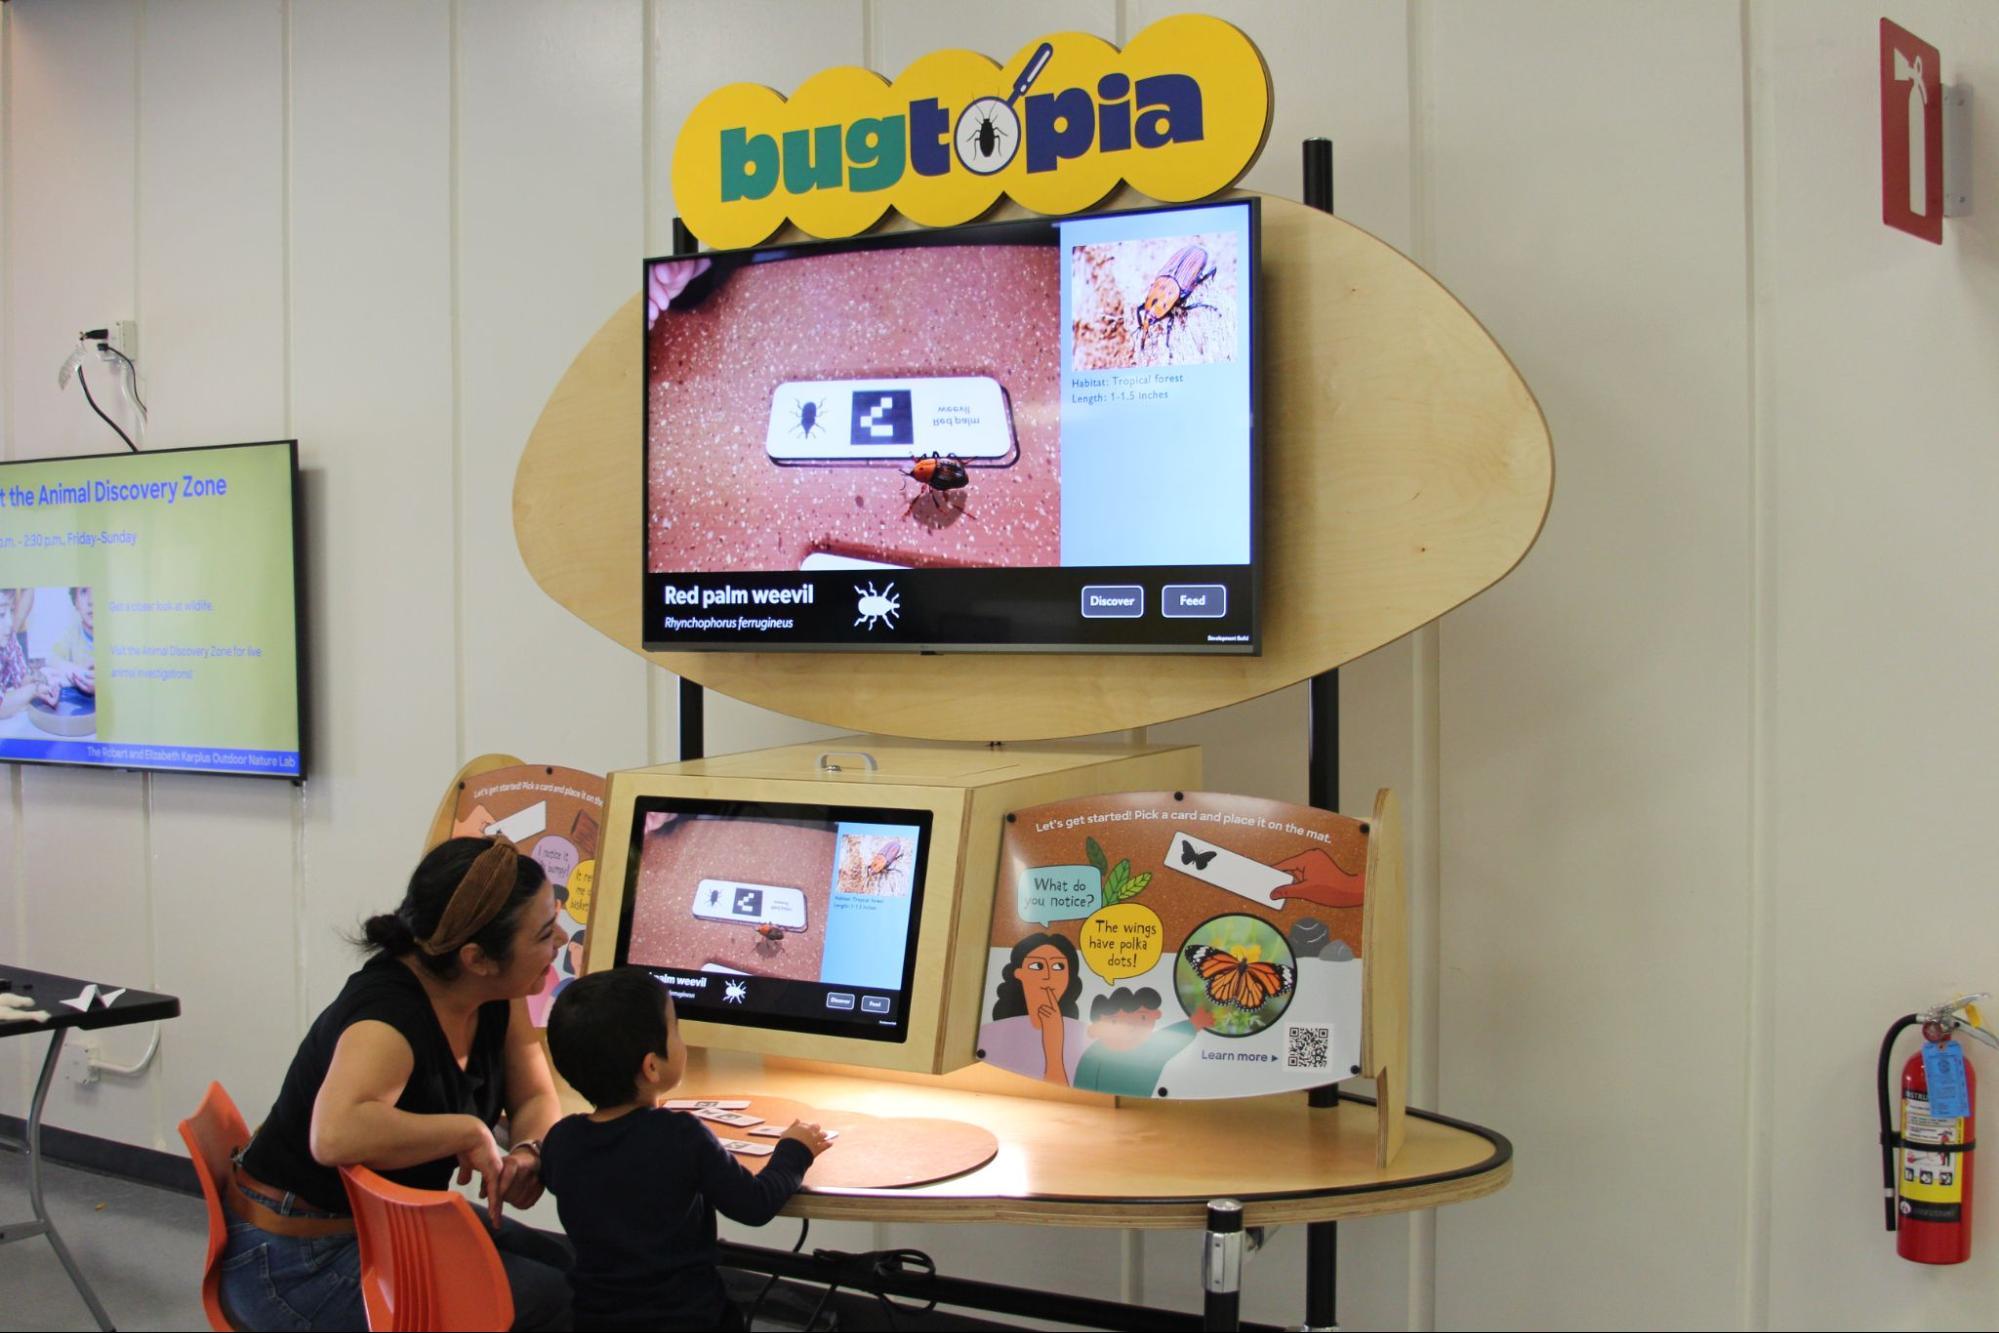 An adult and child are looking at bugs at the Bugtopia exhibit.